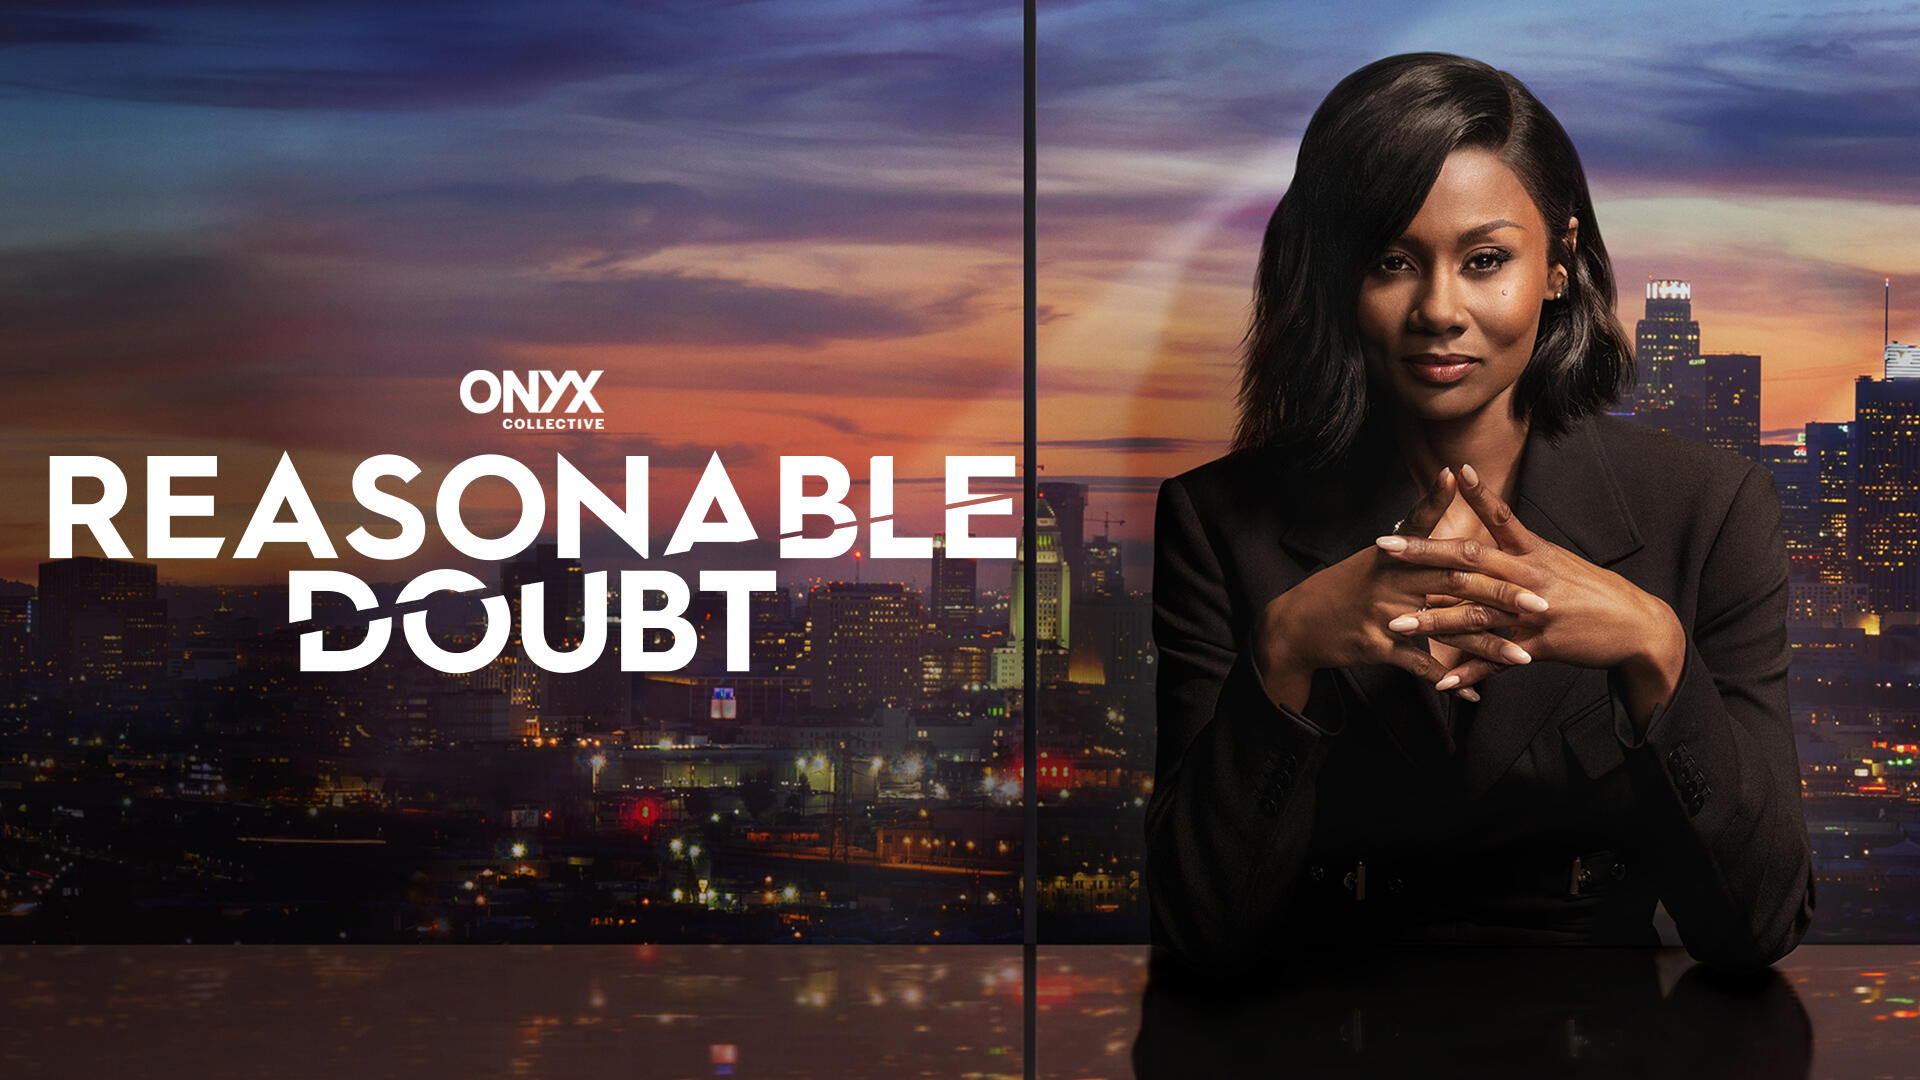 Reasonable Doubt -- Season 1 -- In Reasonable Doubt, you’ll judge Jax Stewart for her questionable ethics and wild interpretations of the law ... until you’re the one in trouble. Then you’ll see her for what she is: the most brilliant and fearless defense attorney in Los Angeles who bucks the justice system at every chance she gets. Jax (Emayatzy Corinealdi), shown. (Courtesy of Hulu)